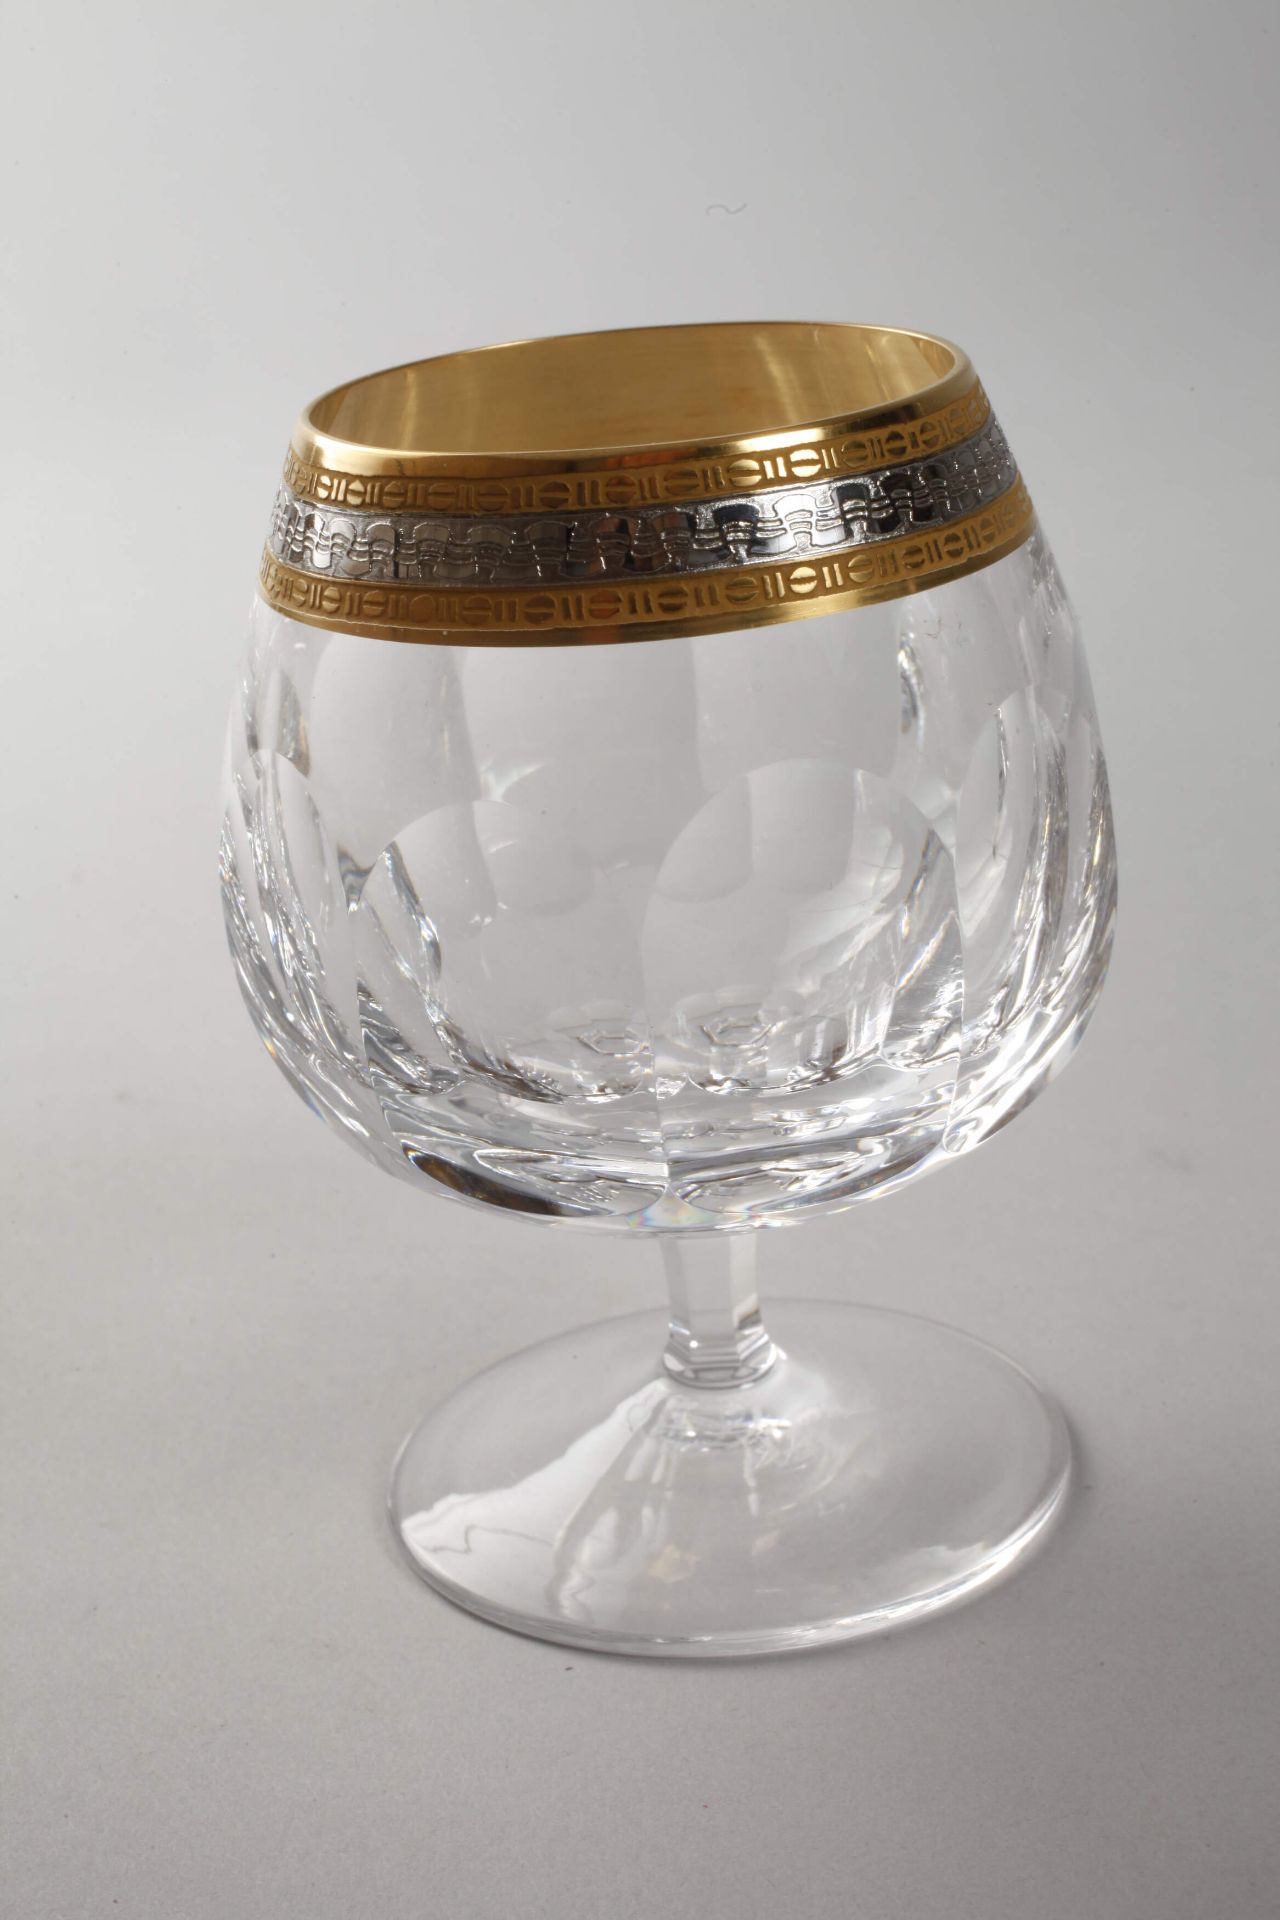 Set of glasses with gold rim - Image 6 of 6